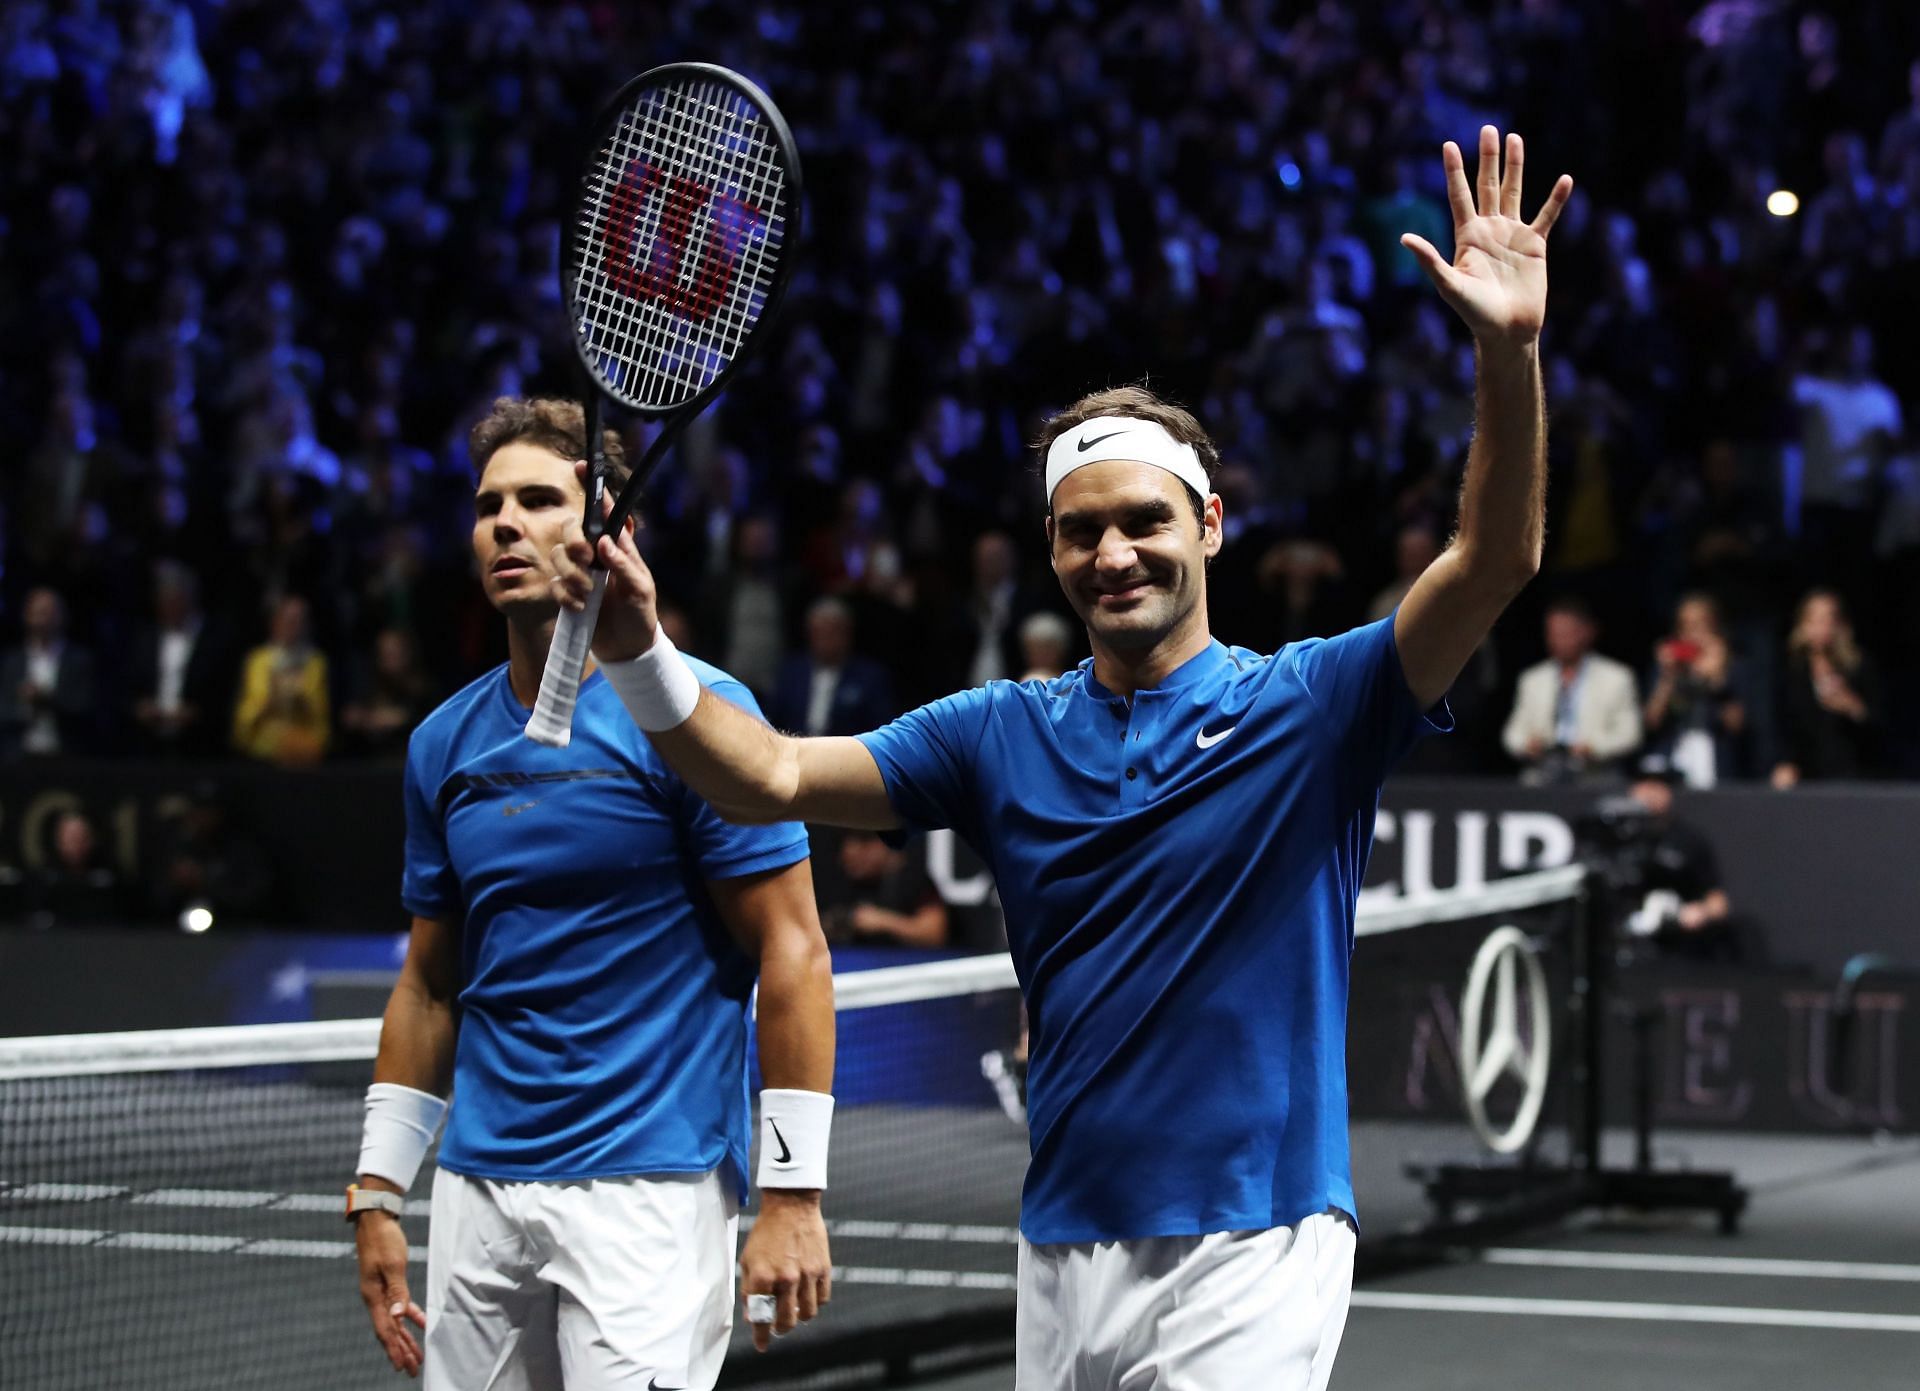 Laver Cup - Day Two